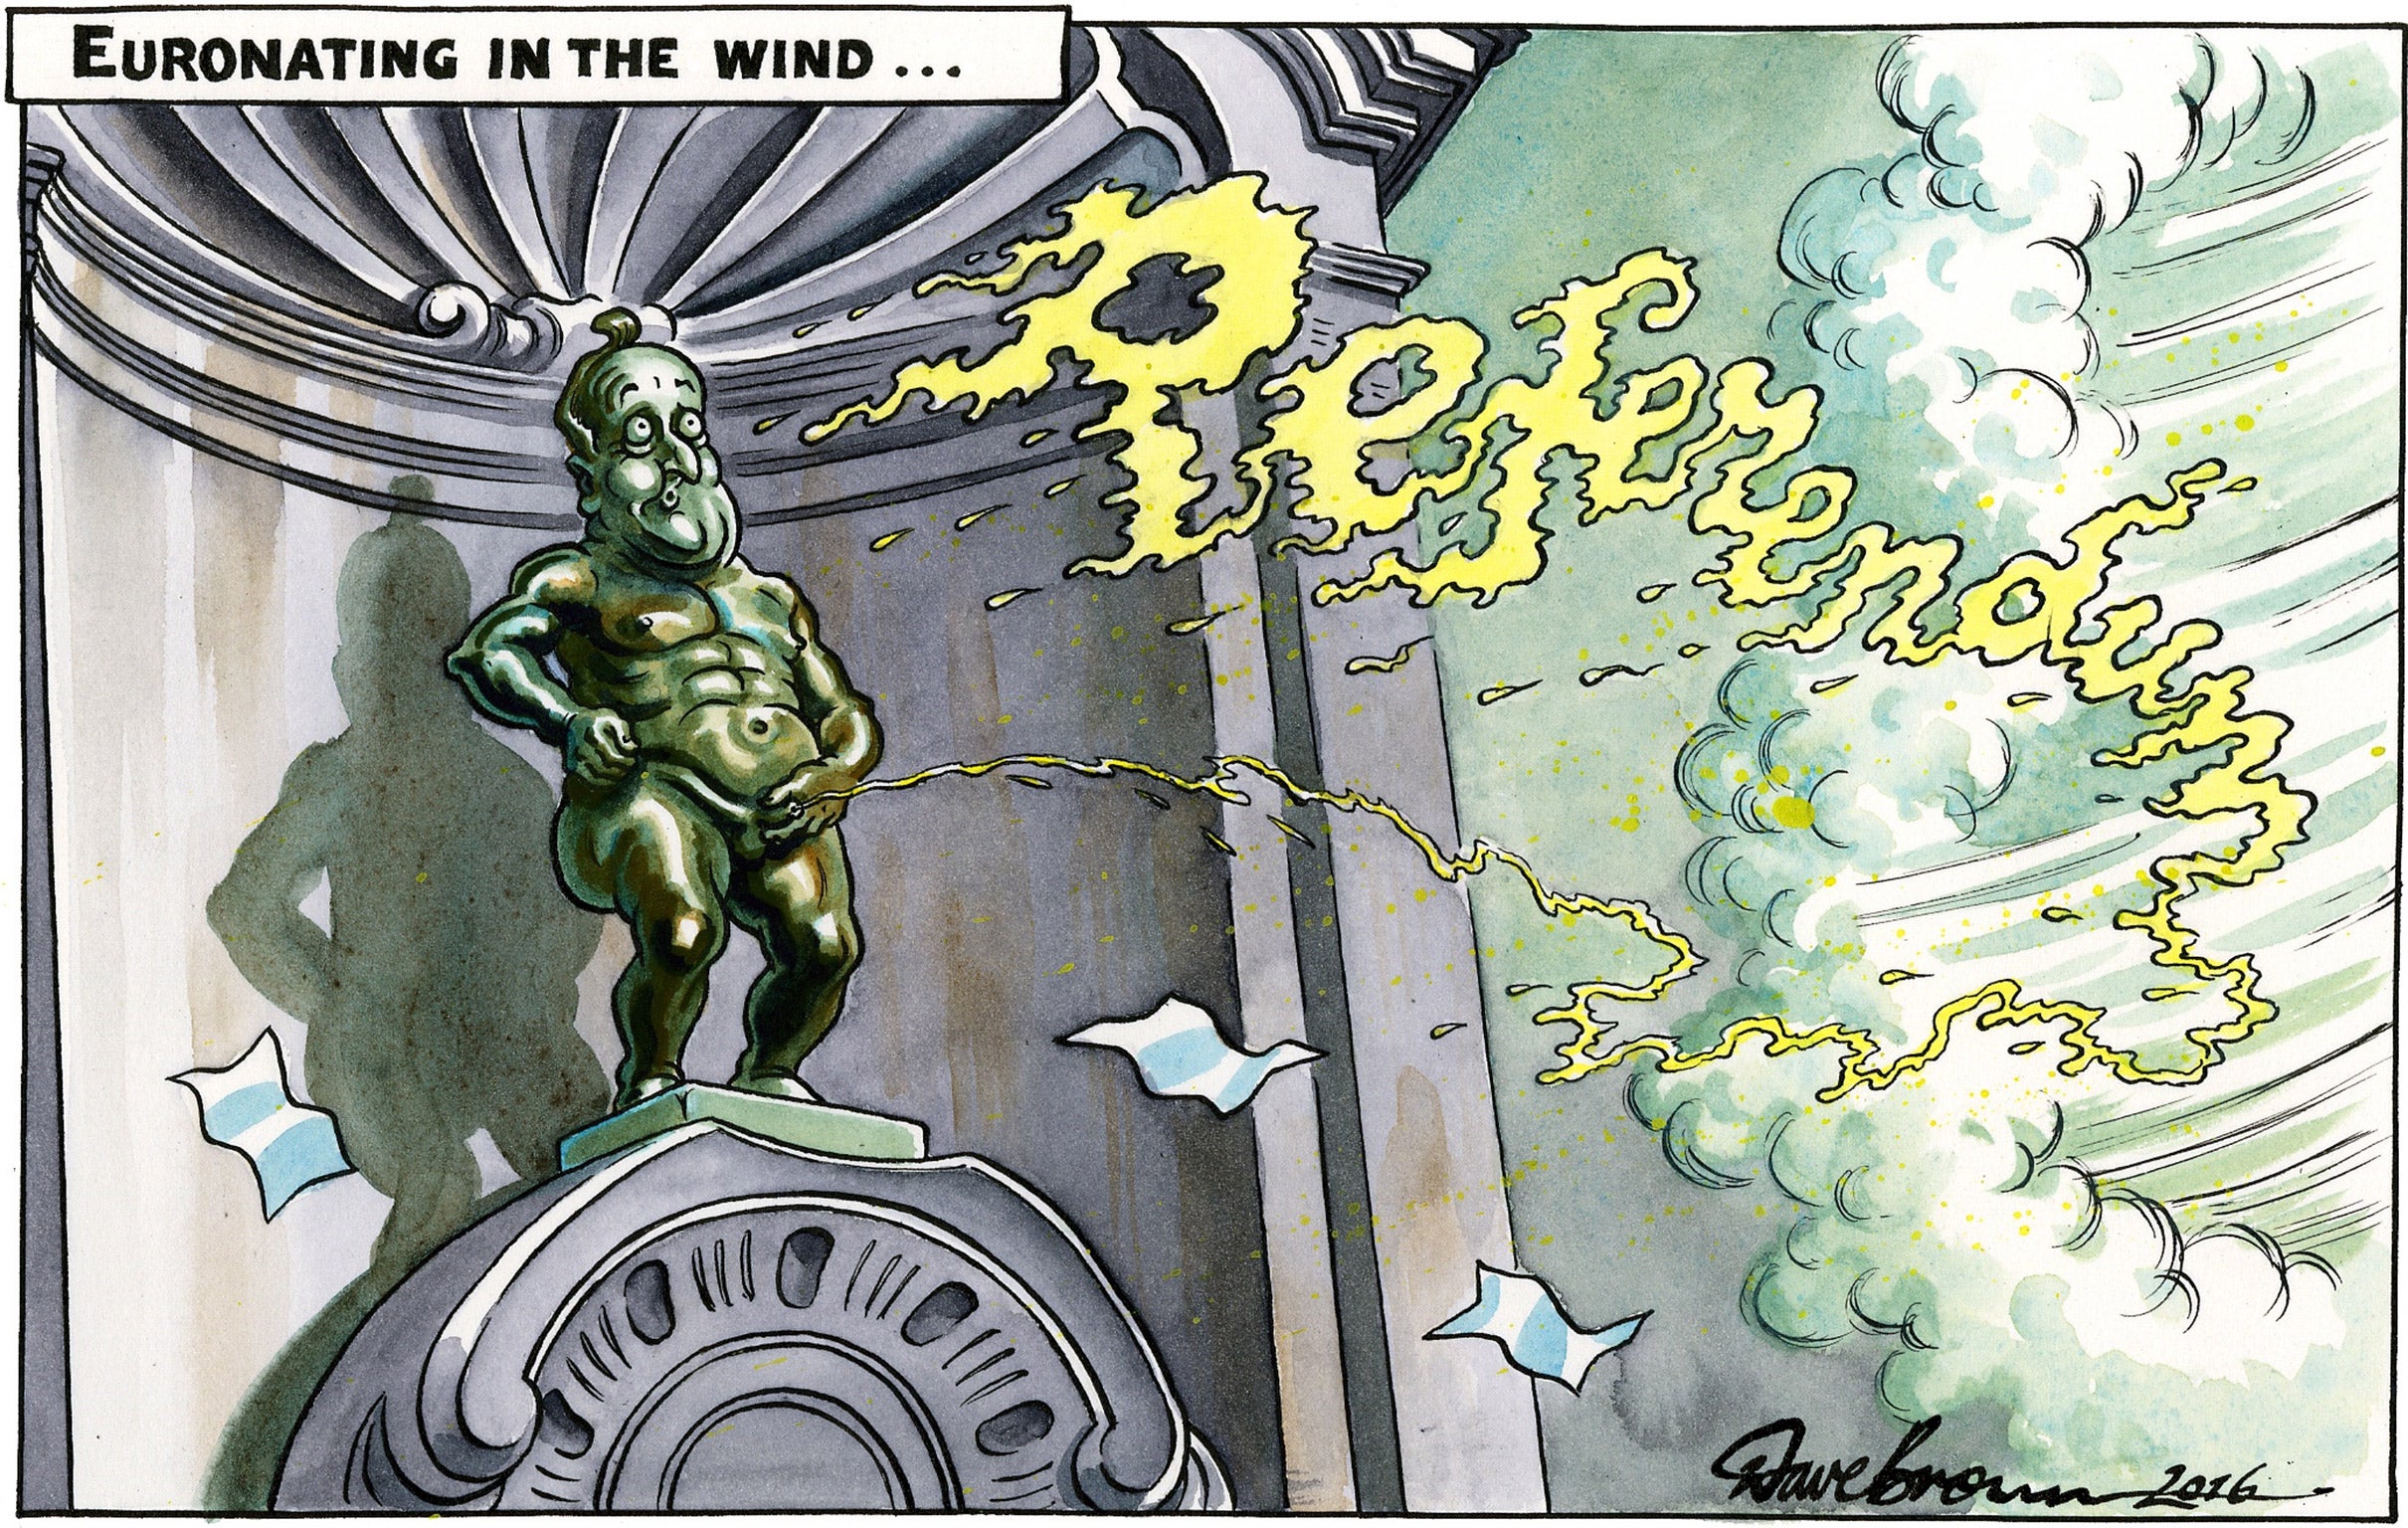 Dave Brown’s cartoon – for more of his work see the link below